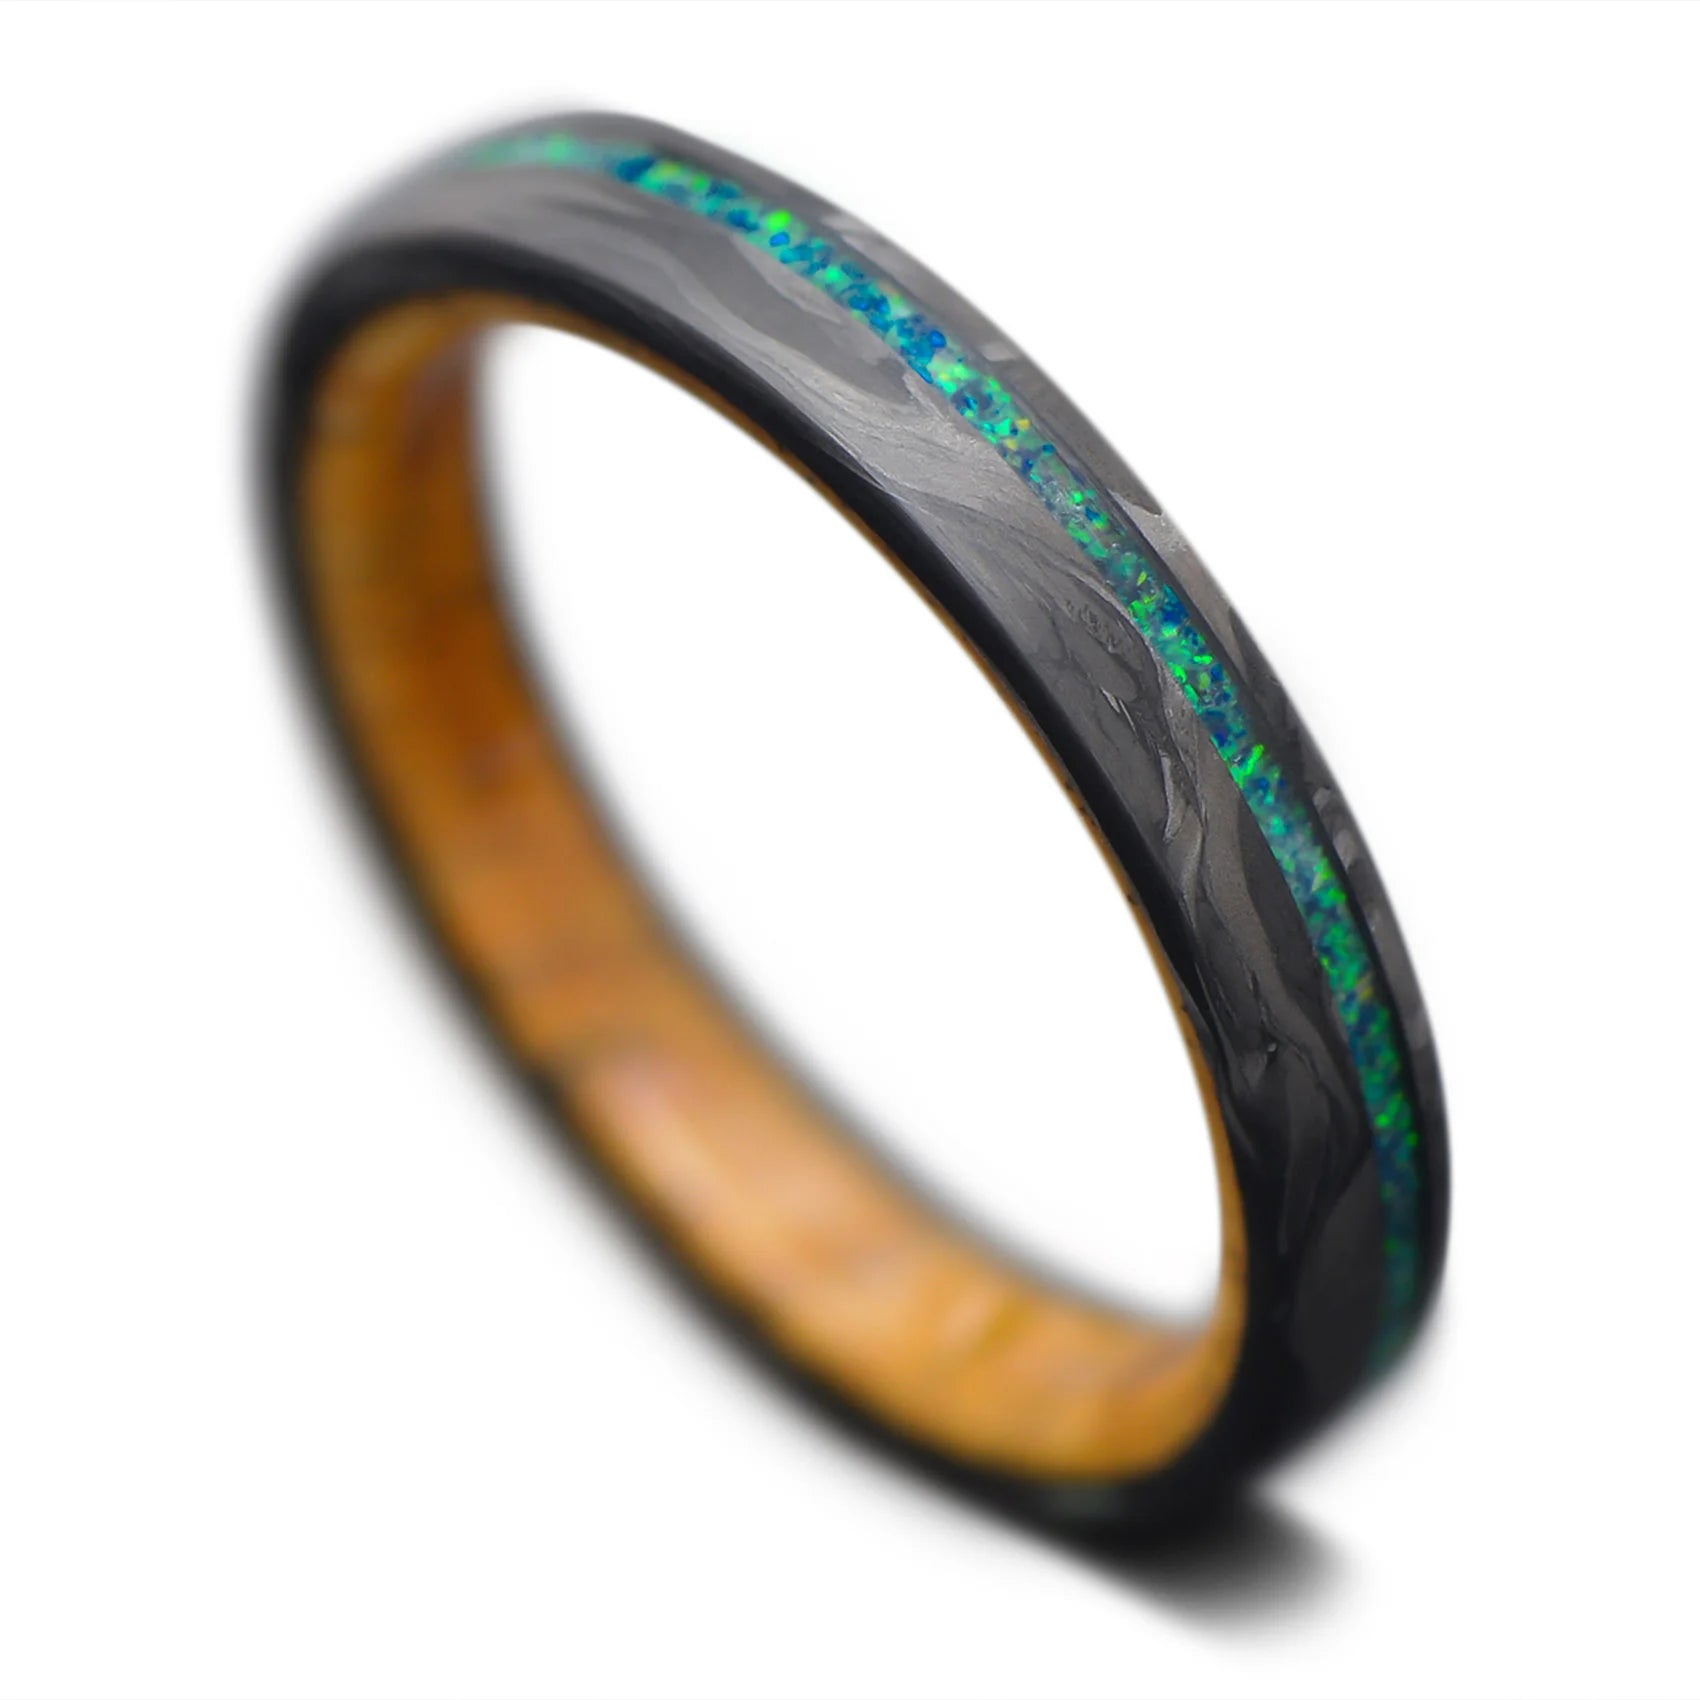 Carbon Forged ring with emerald opal inlay and spalted tamarind wood inner sleeve, 4mm - THE HORIZON